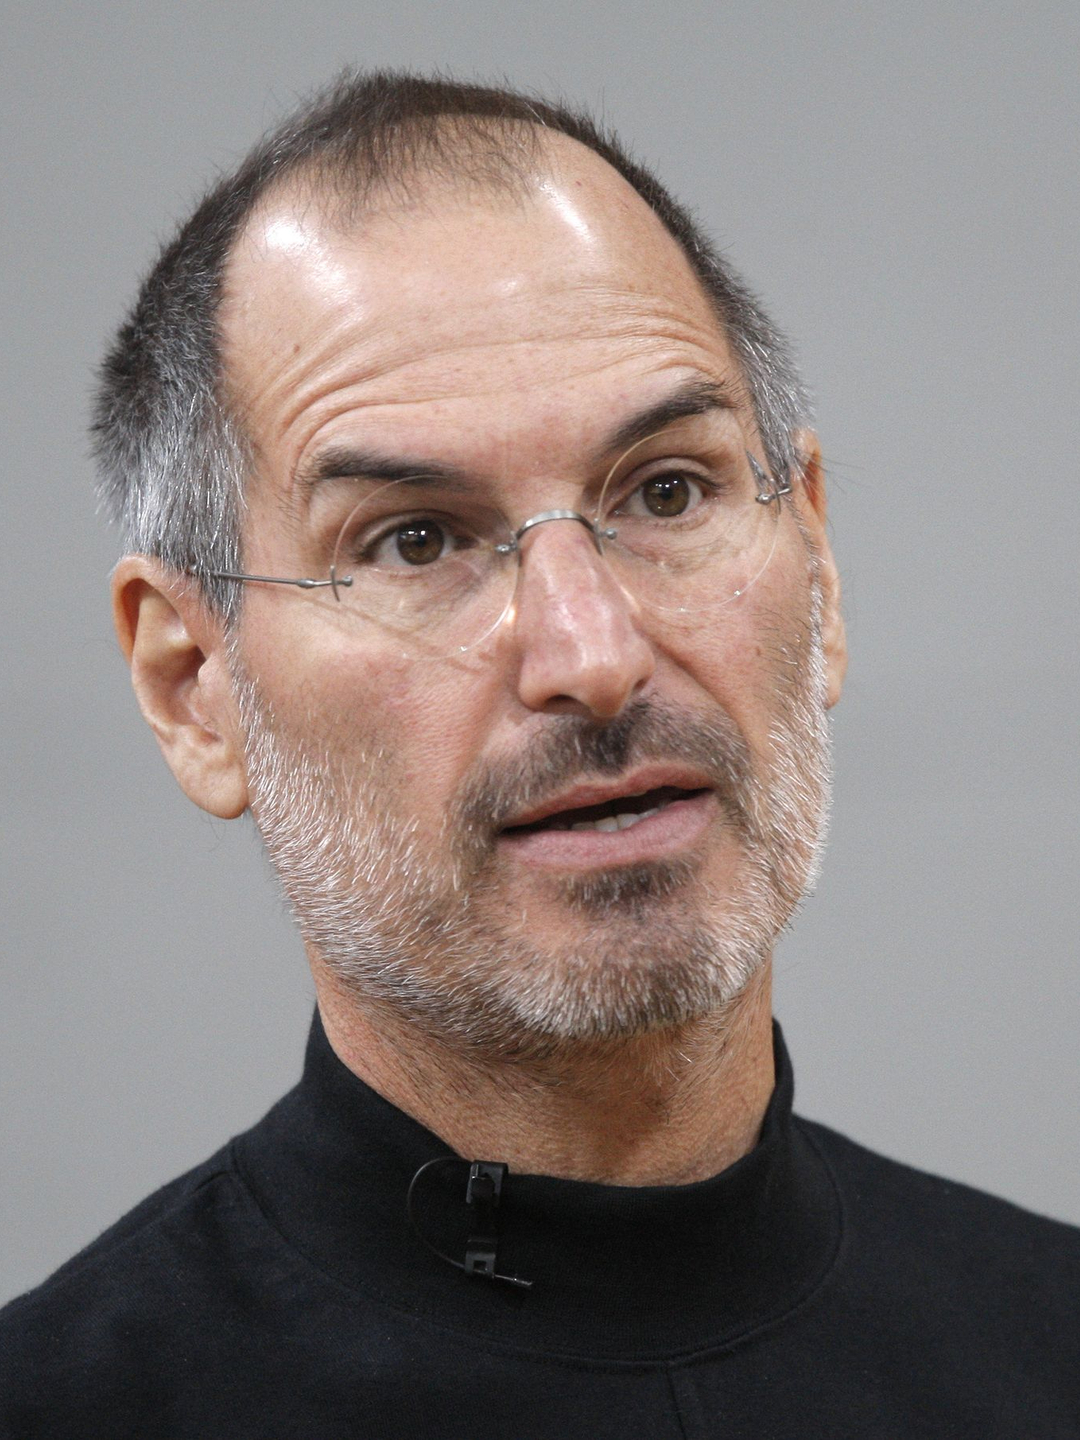 Steve Jobs how did he became famous